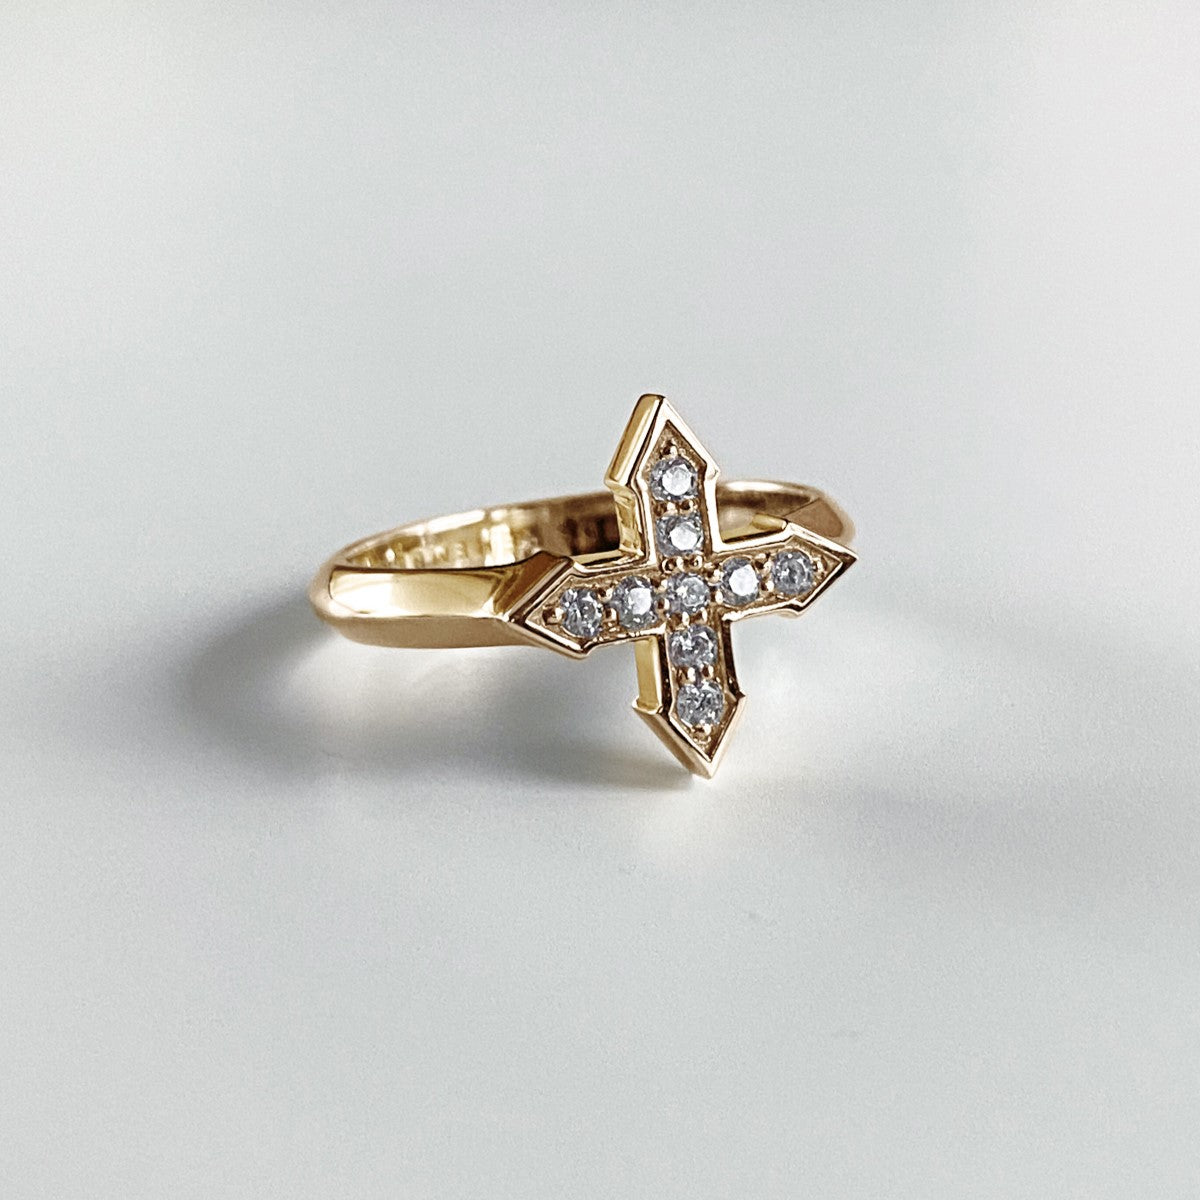 RING STAR "GLOW" WITH MOISSANITE / SOLID GOLD